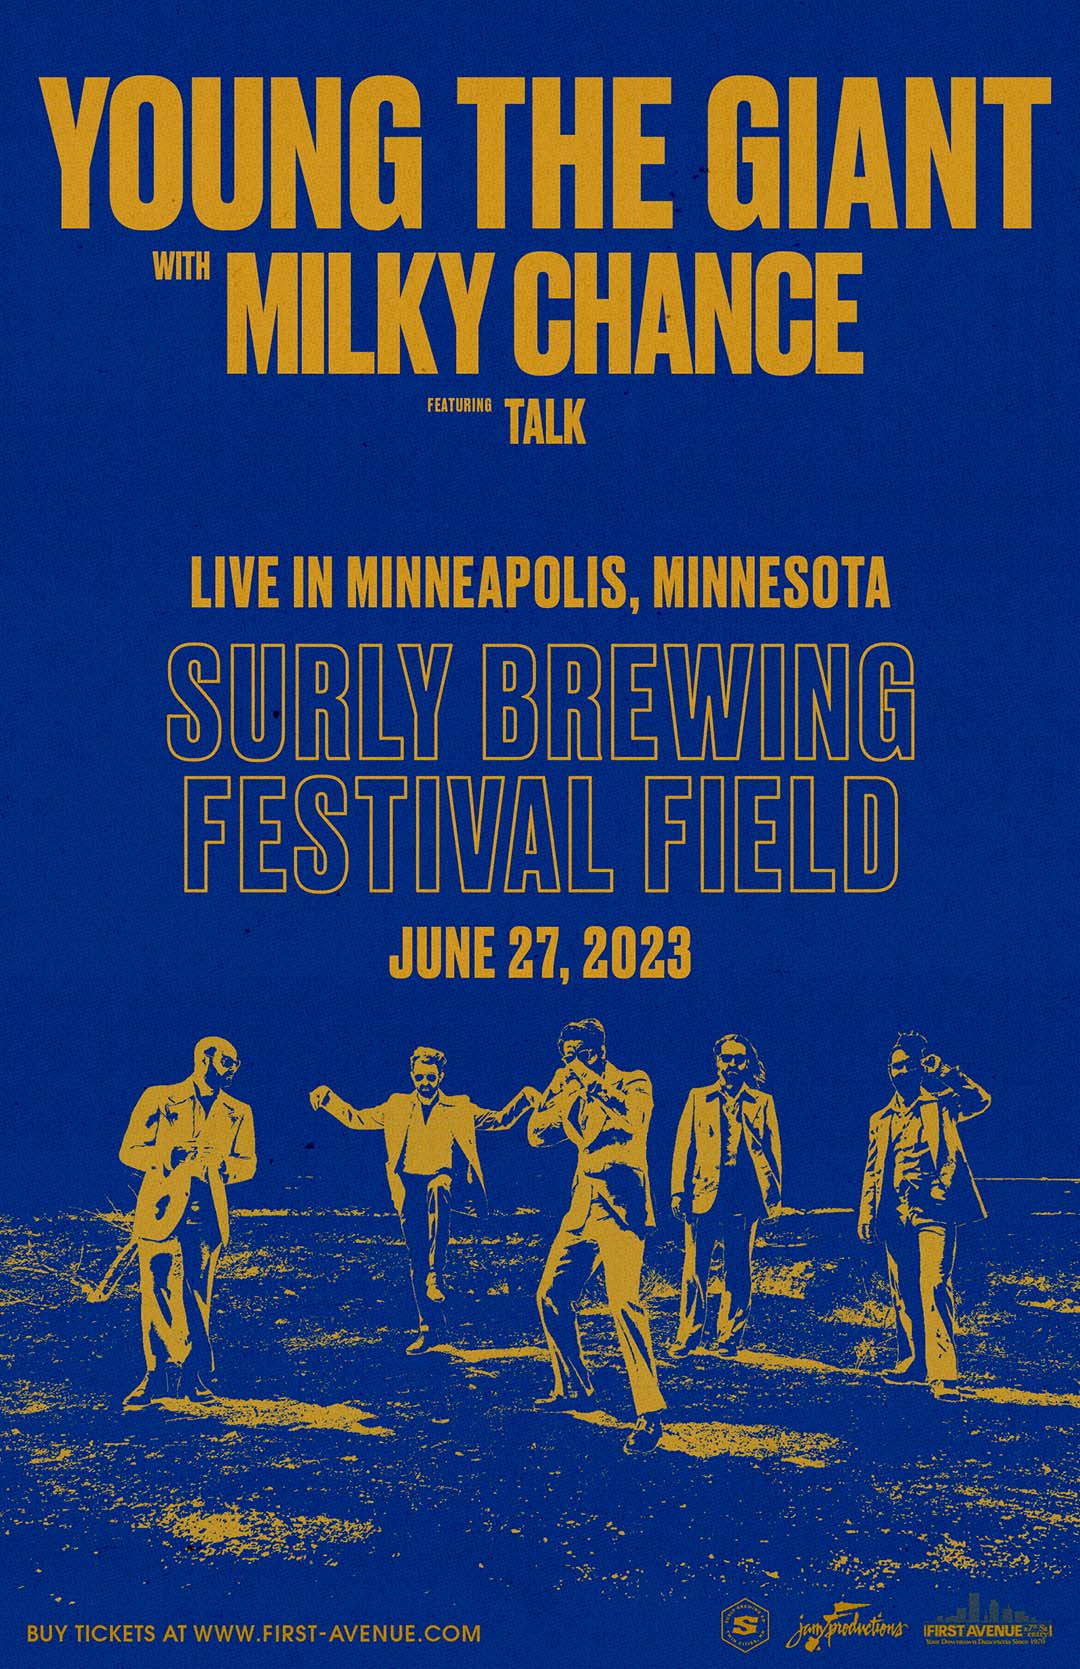 Young the Giant with Milky Chance ★ Surly Brewing Festival Field